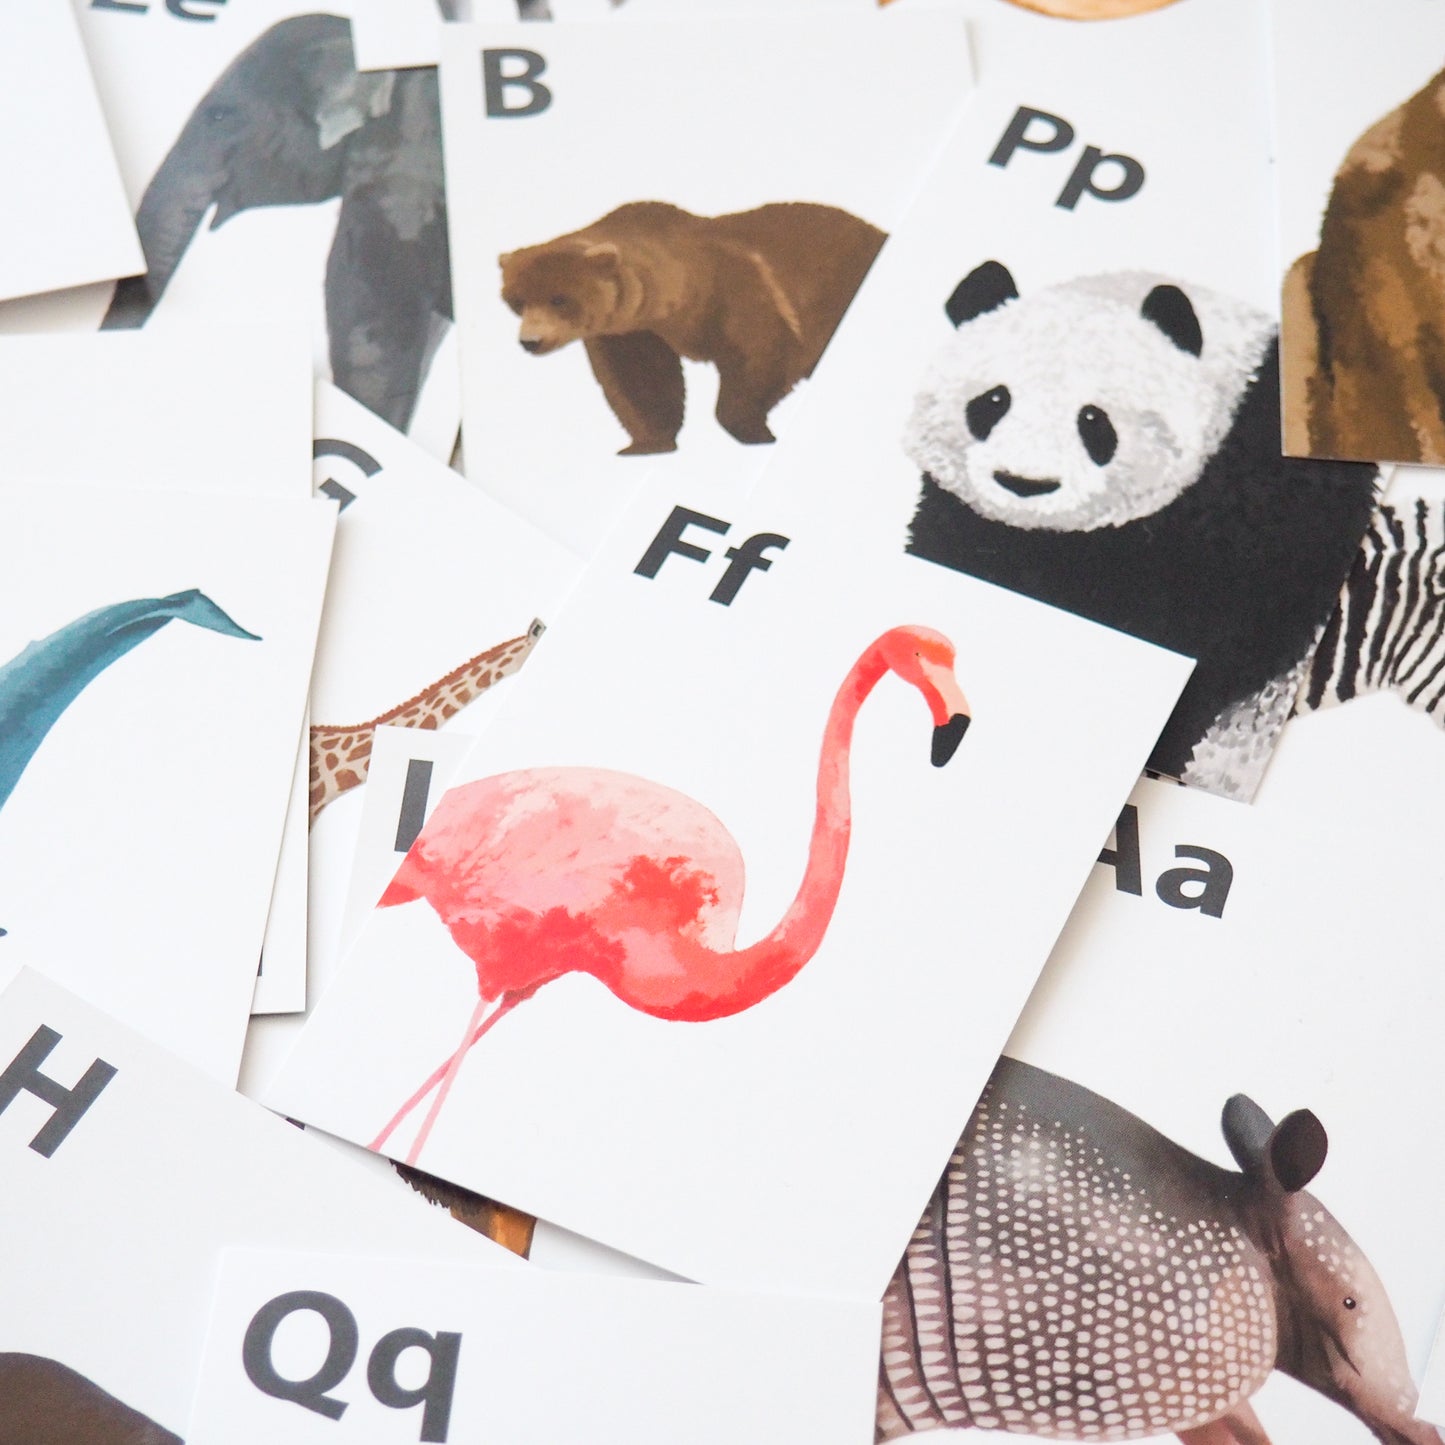 "From A to Z" | Alphabet Flashcards - english version